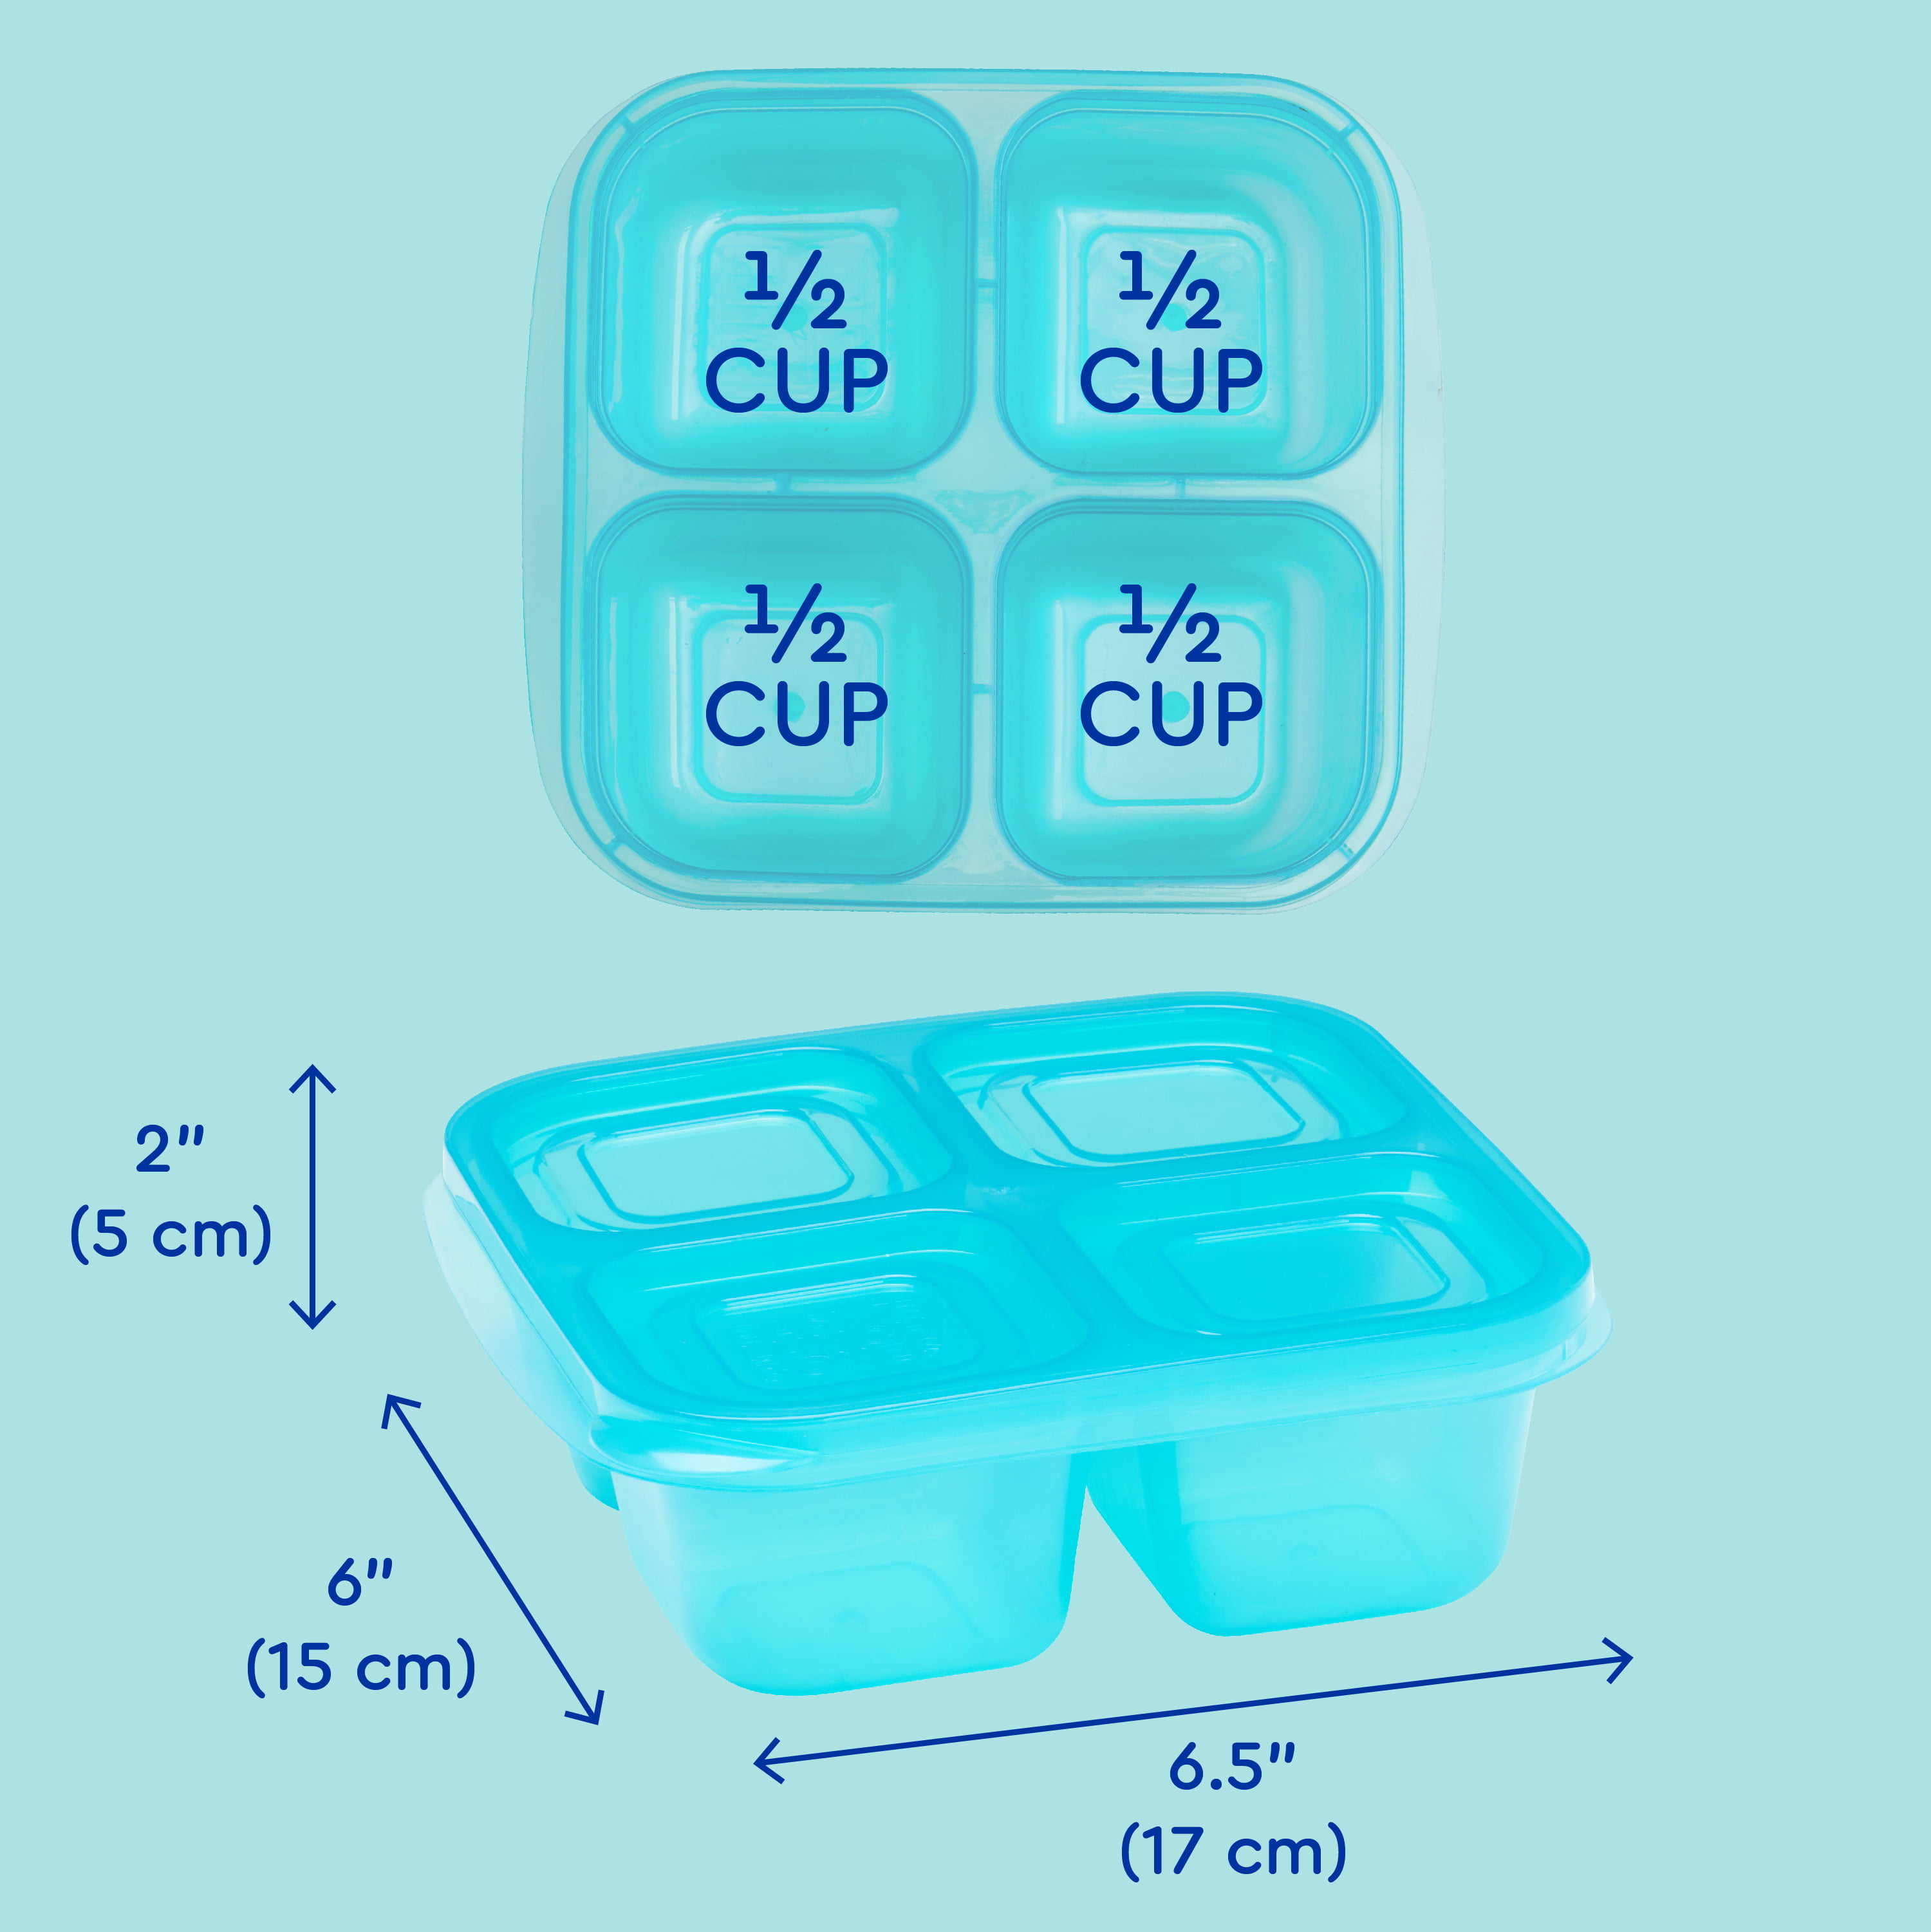  EYNEL 9 oz Small Round Food Storage Containers with Lids Set of  10, Airtight Leakproof Reusable, Plastic To Go Bento Box, Mini Lunch Box,  Snack Storage Bowl, for Kitchen, Picnic (10)